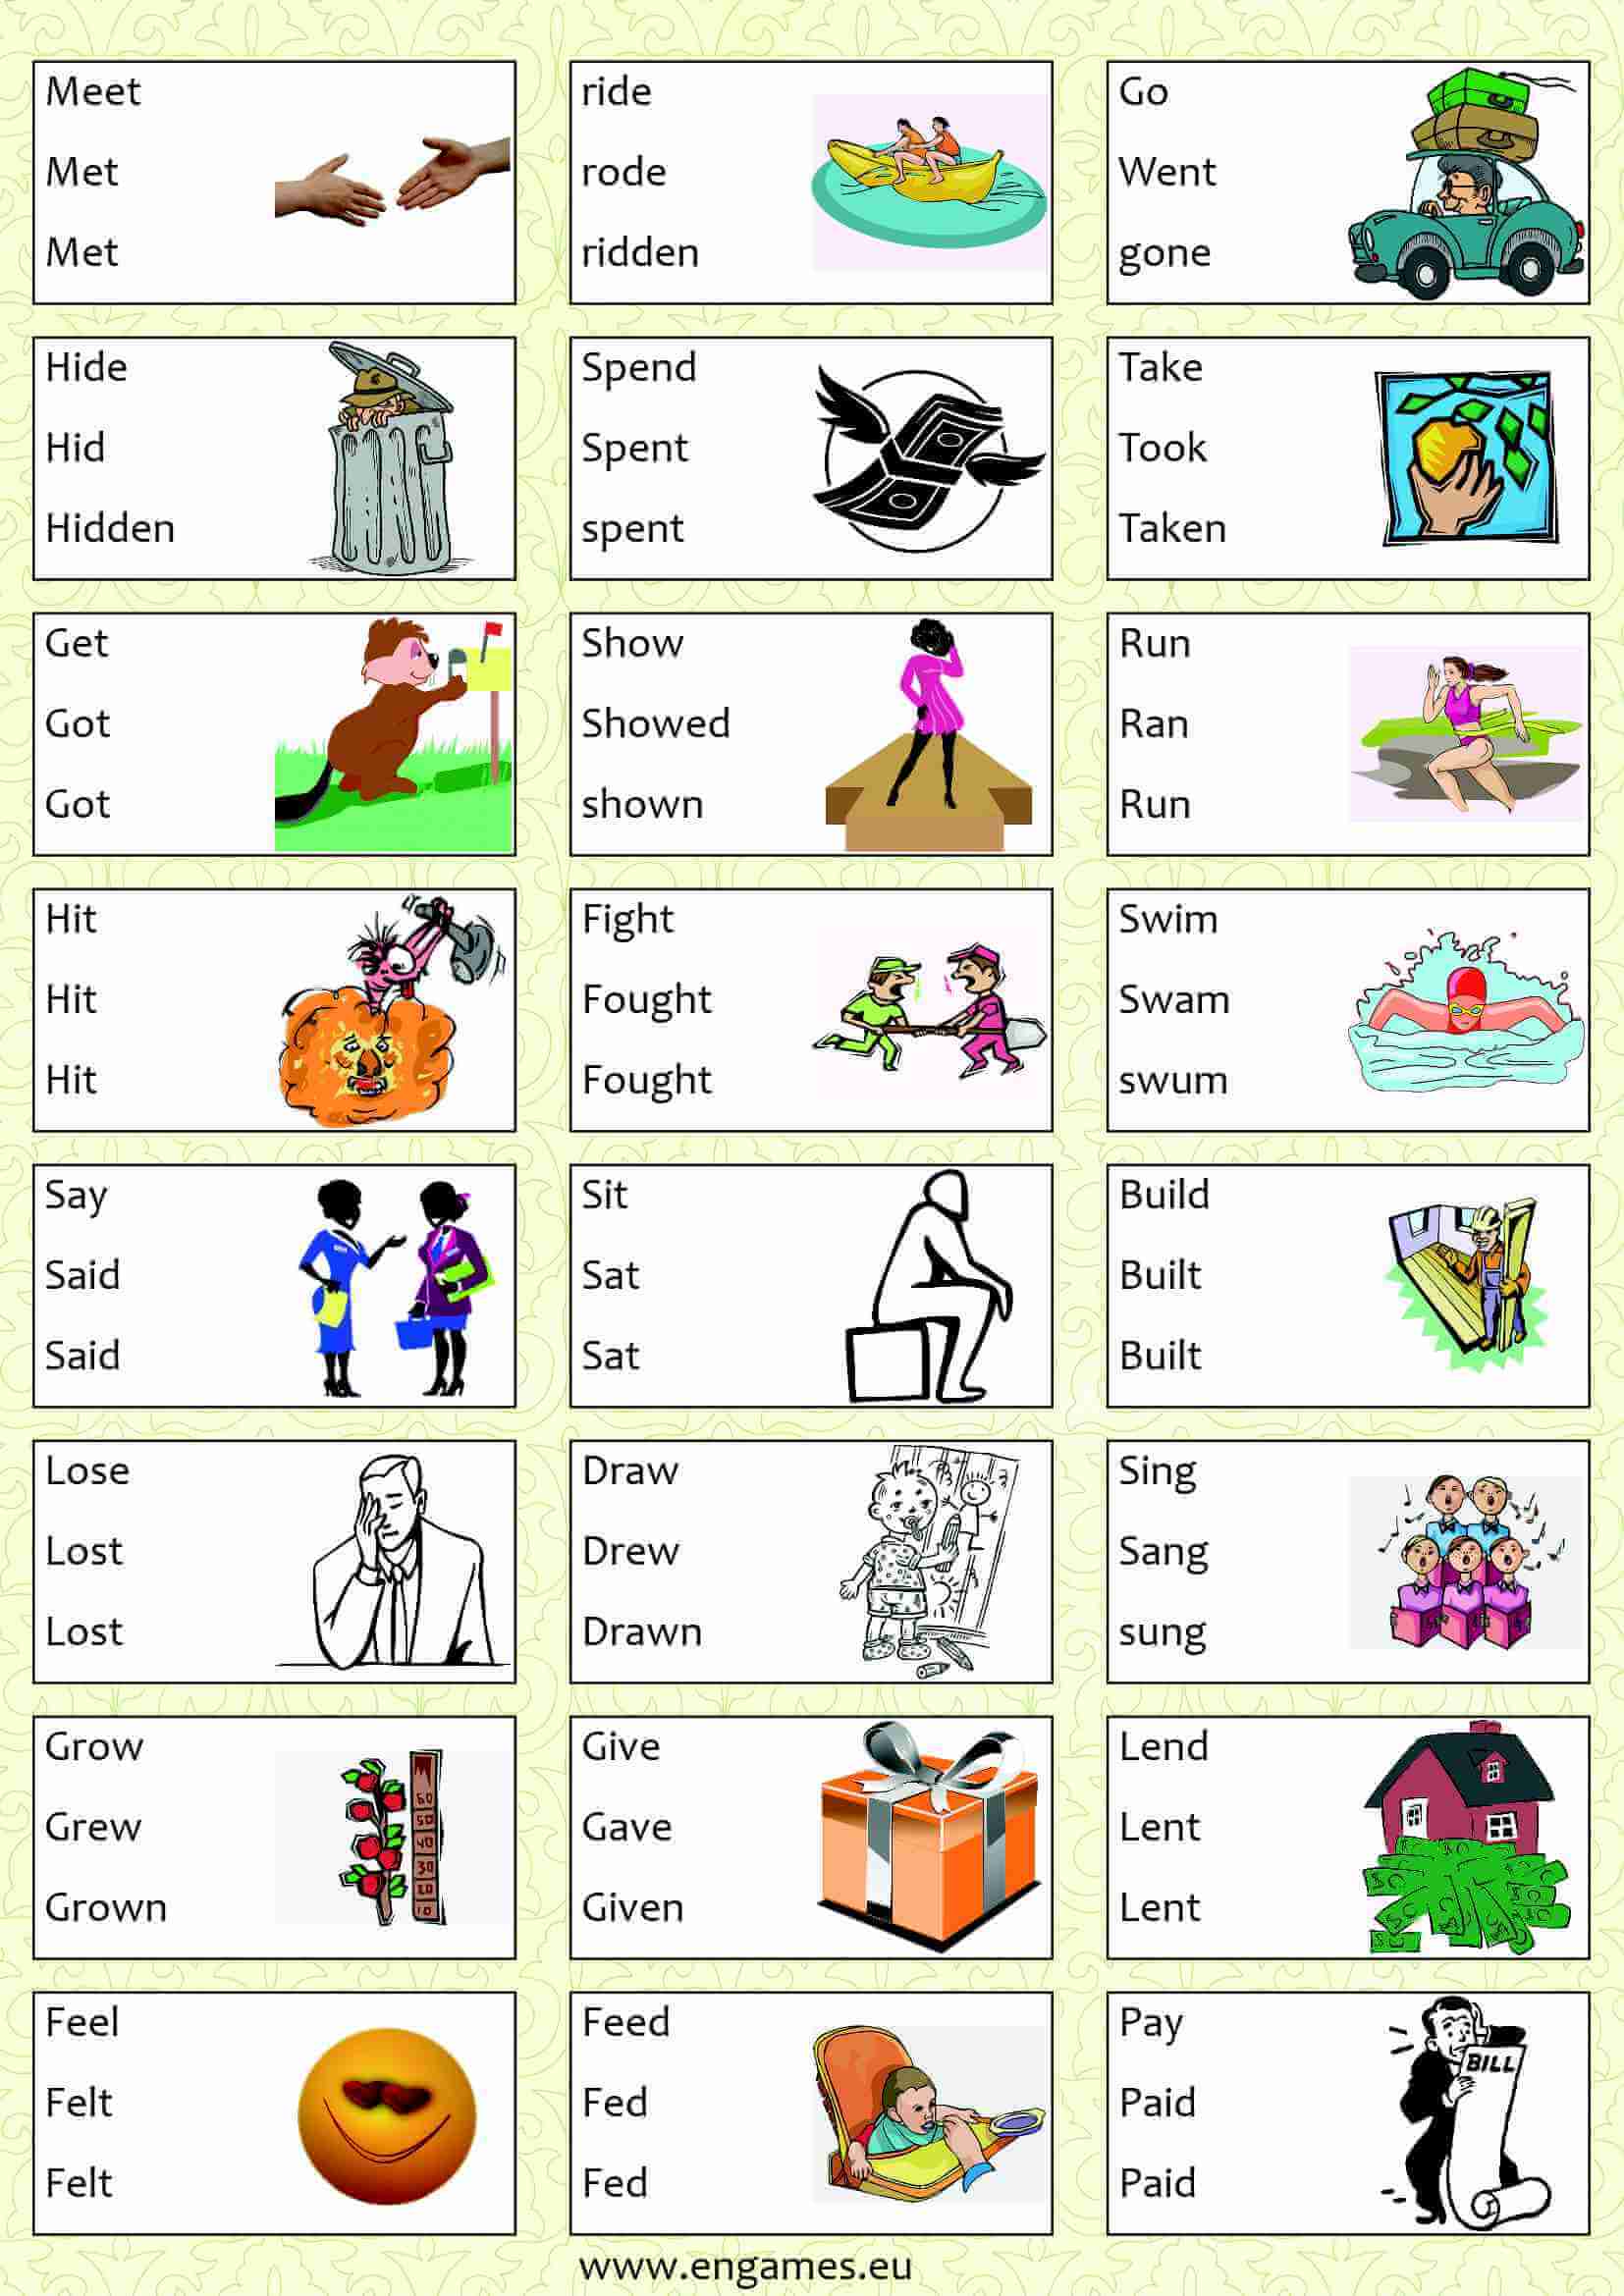 grammar-games-irregular-verbs-games-to-learn-english-games-to